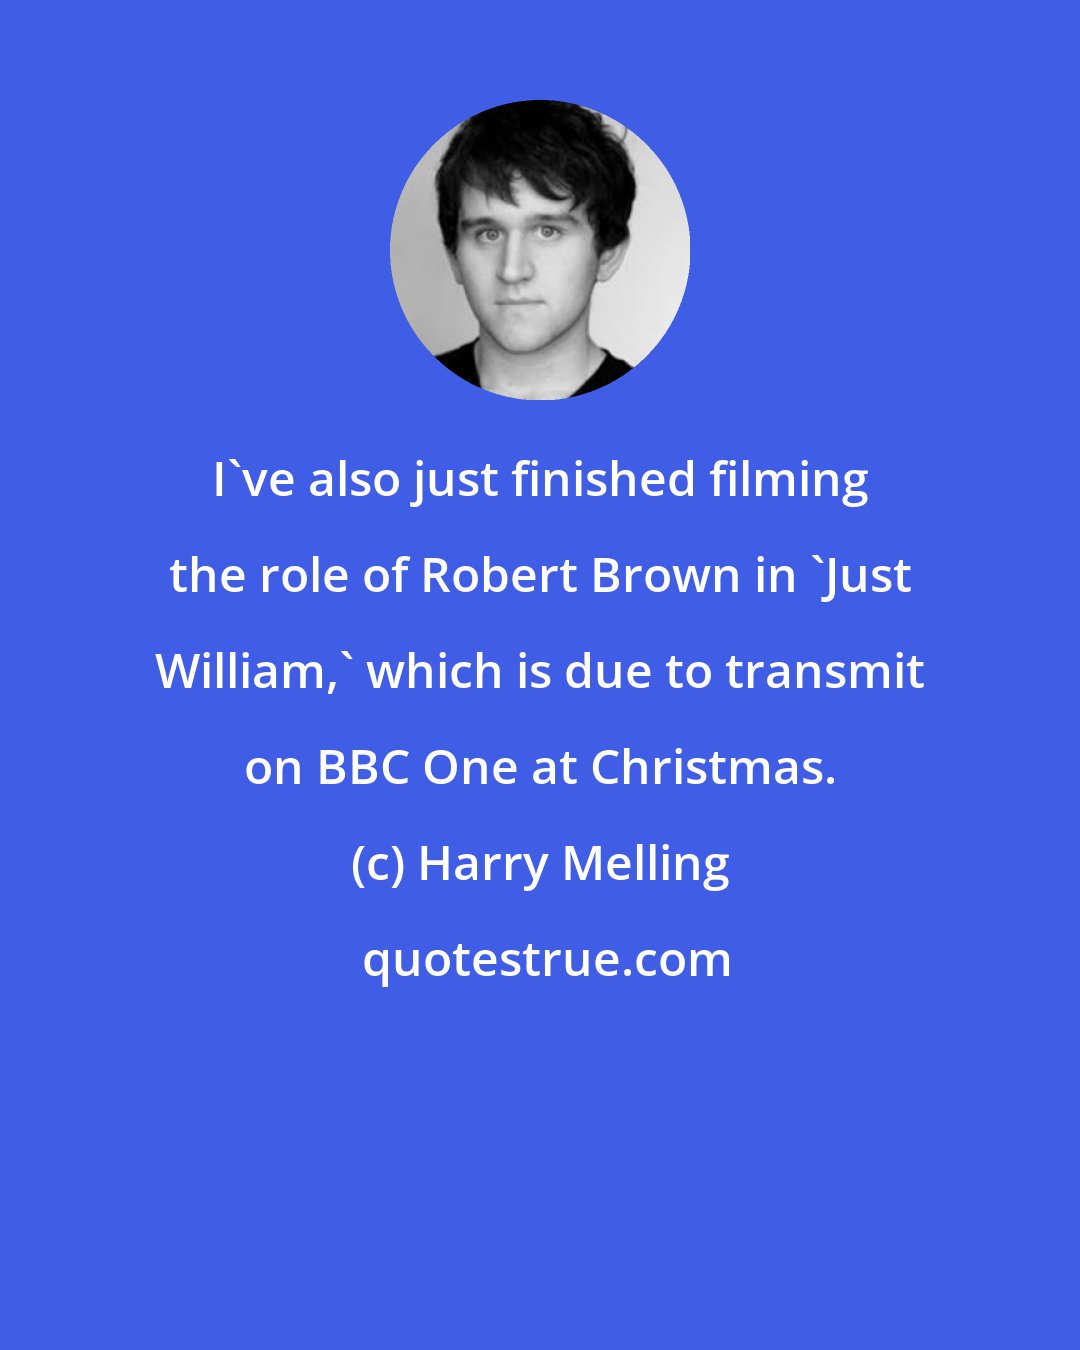 Harry Melling: I've also just finished filming the role of Robert Brown in 'Just William,' which is due to transmit on BBC One at Christmas.